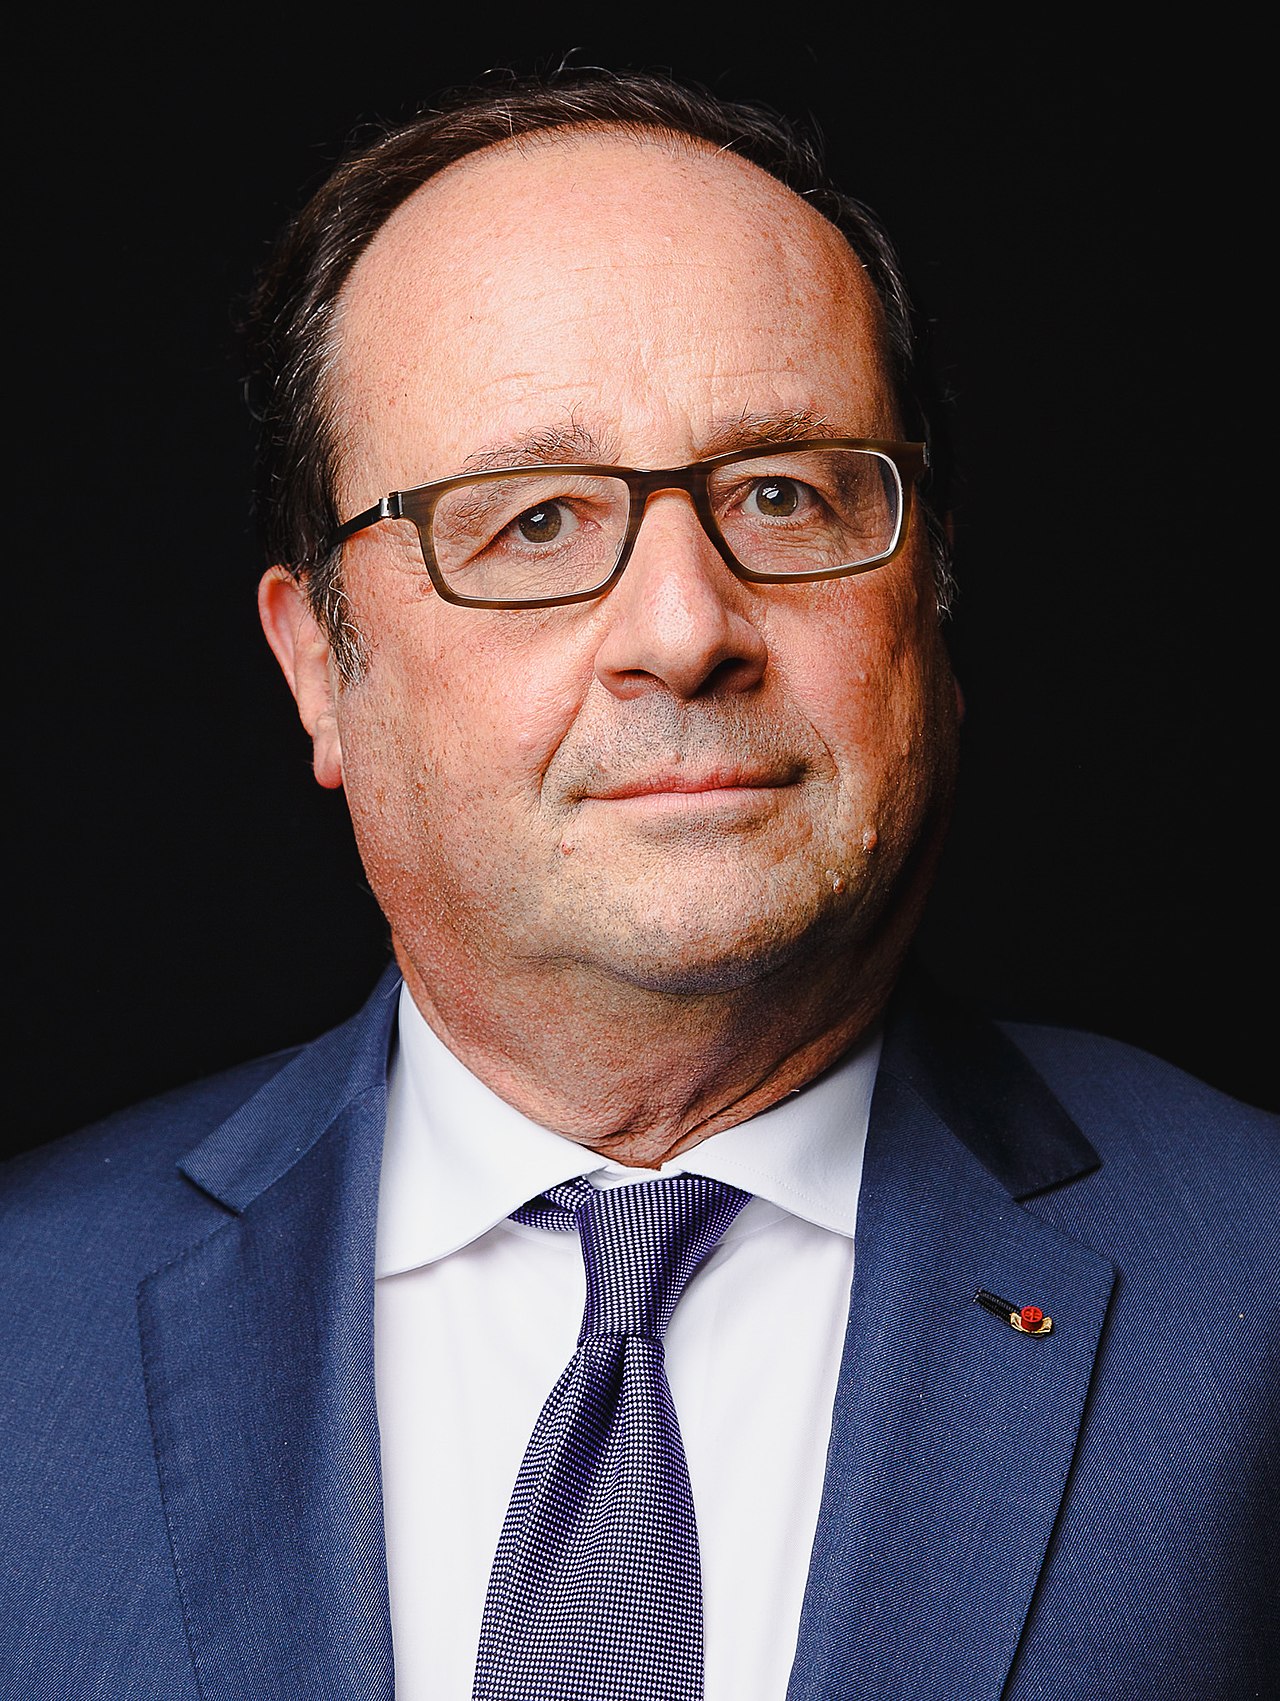 François Hollande 7. Presidents of the Fifth Republic of France